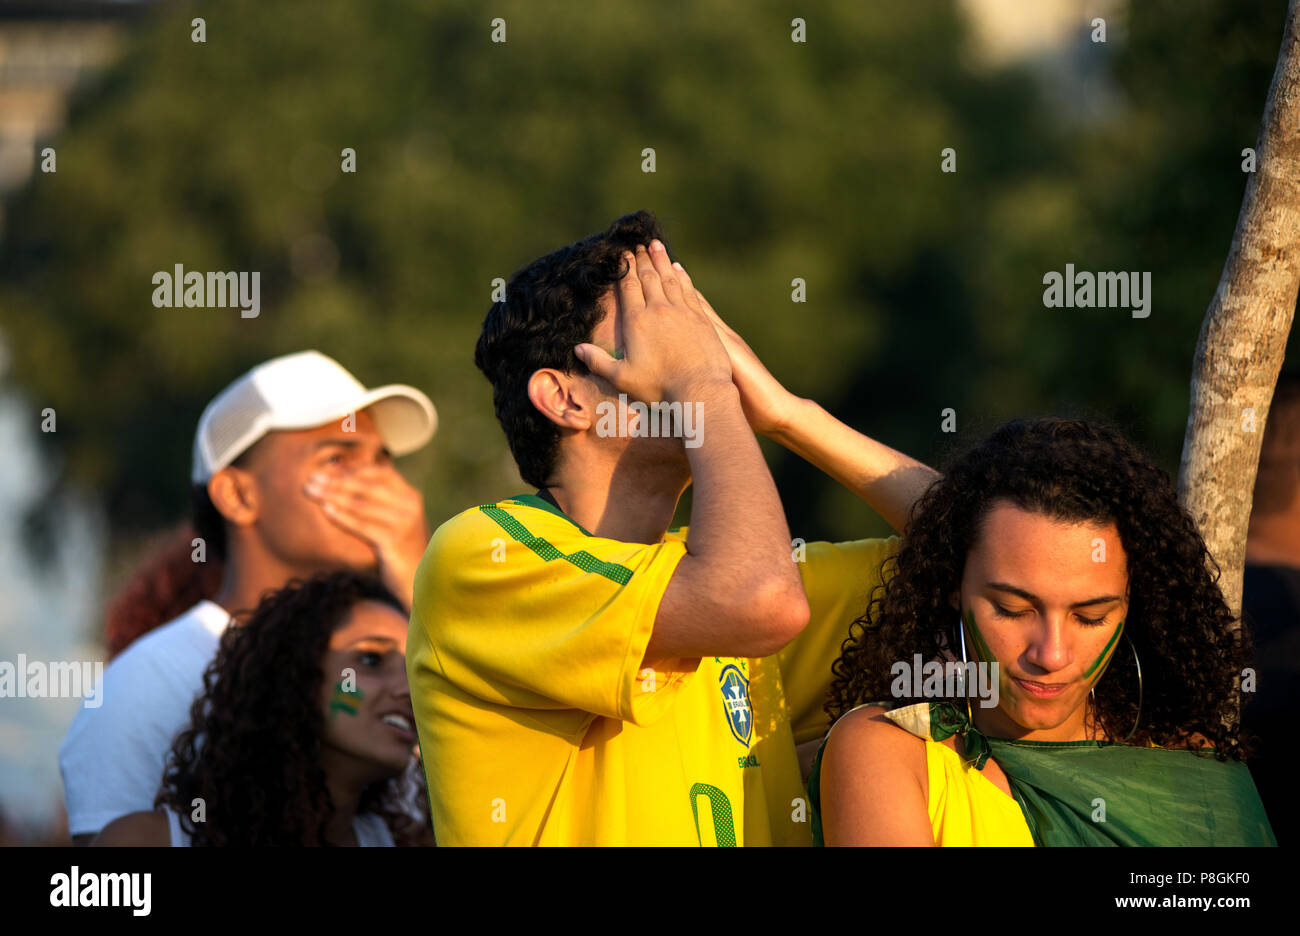 World Cup - July 6, 2018: Brazilian fans react as they watch a soccer match between Brazil and Belgium at a large screen event  in Rio de Janeiro Stock Photo